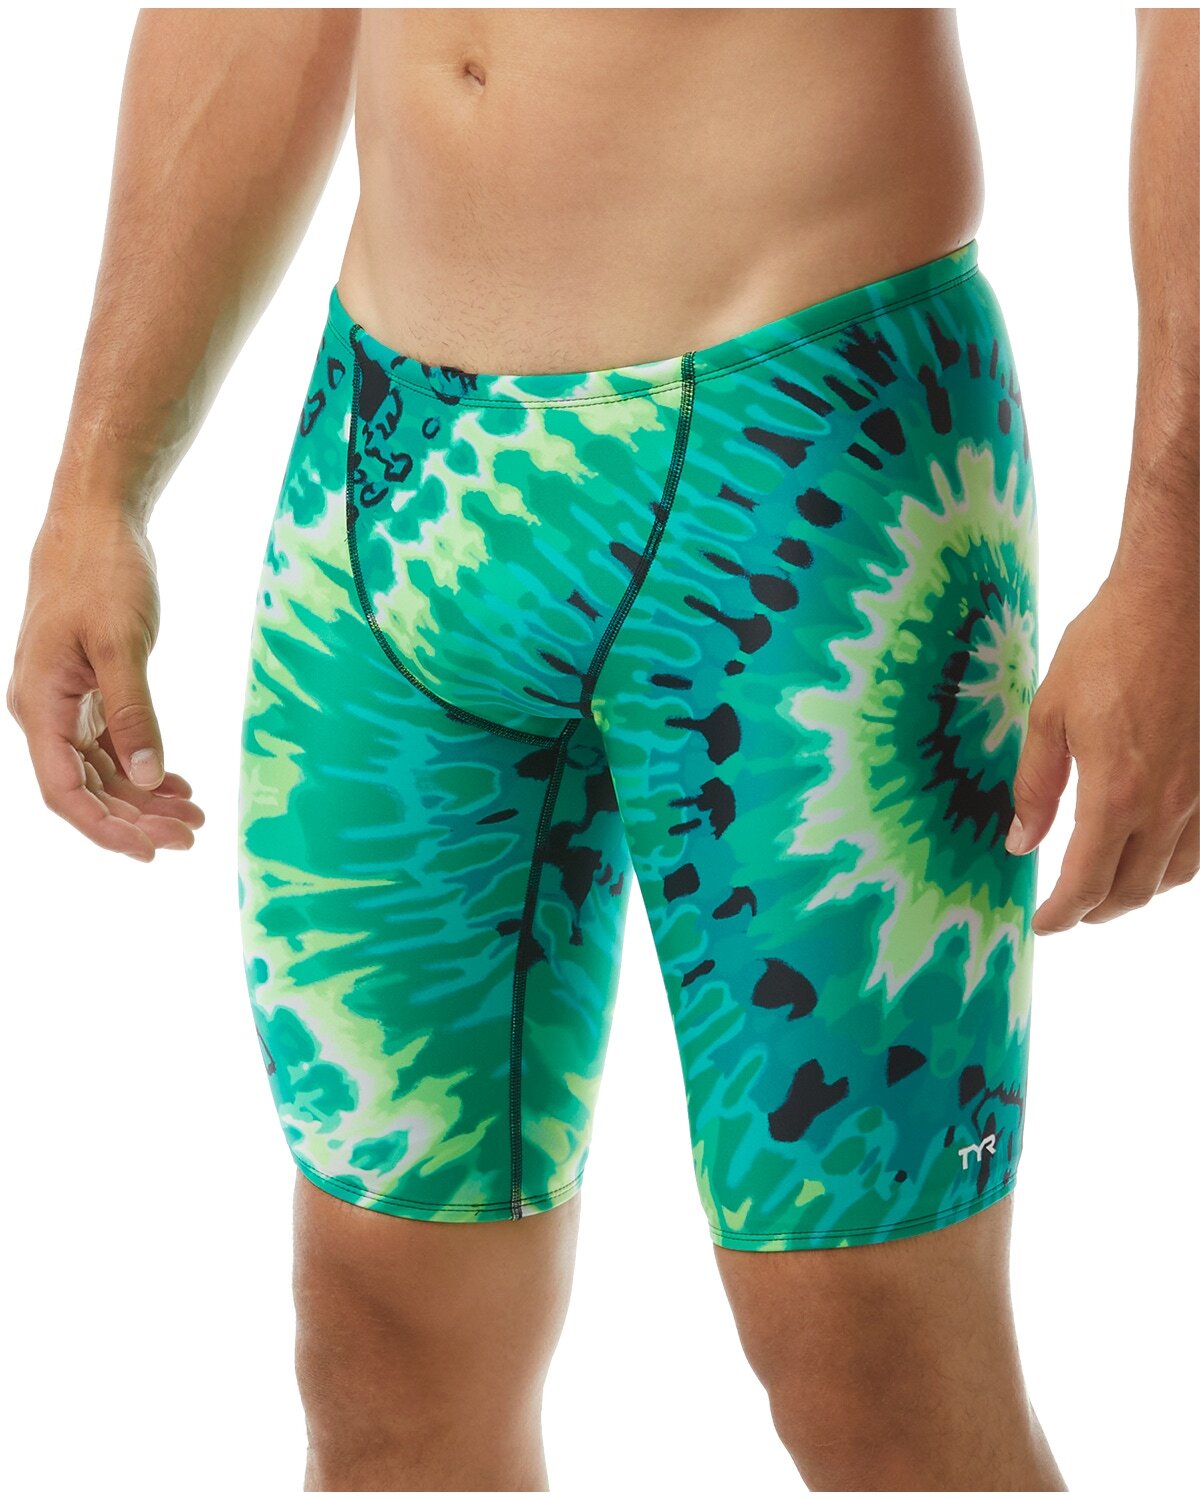 TYR Male Green Bohemian Jammer Size 28